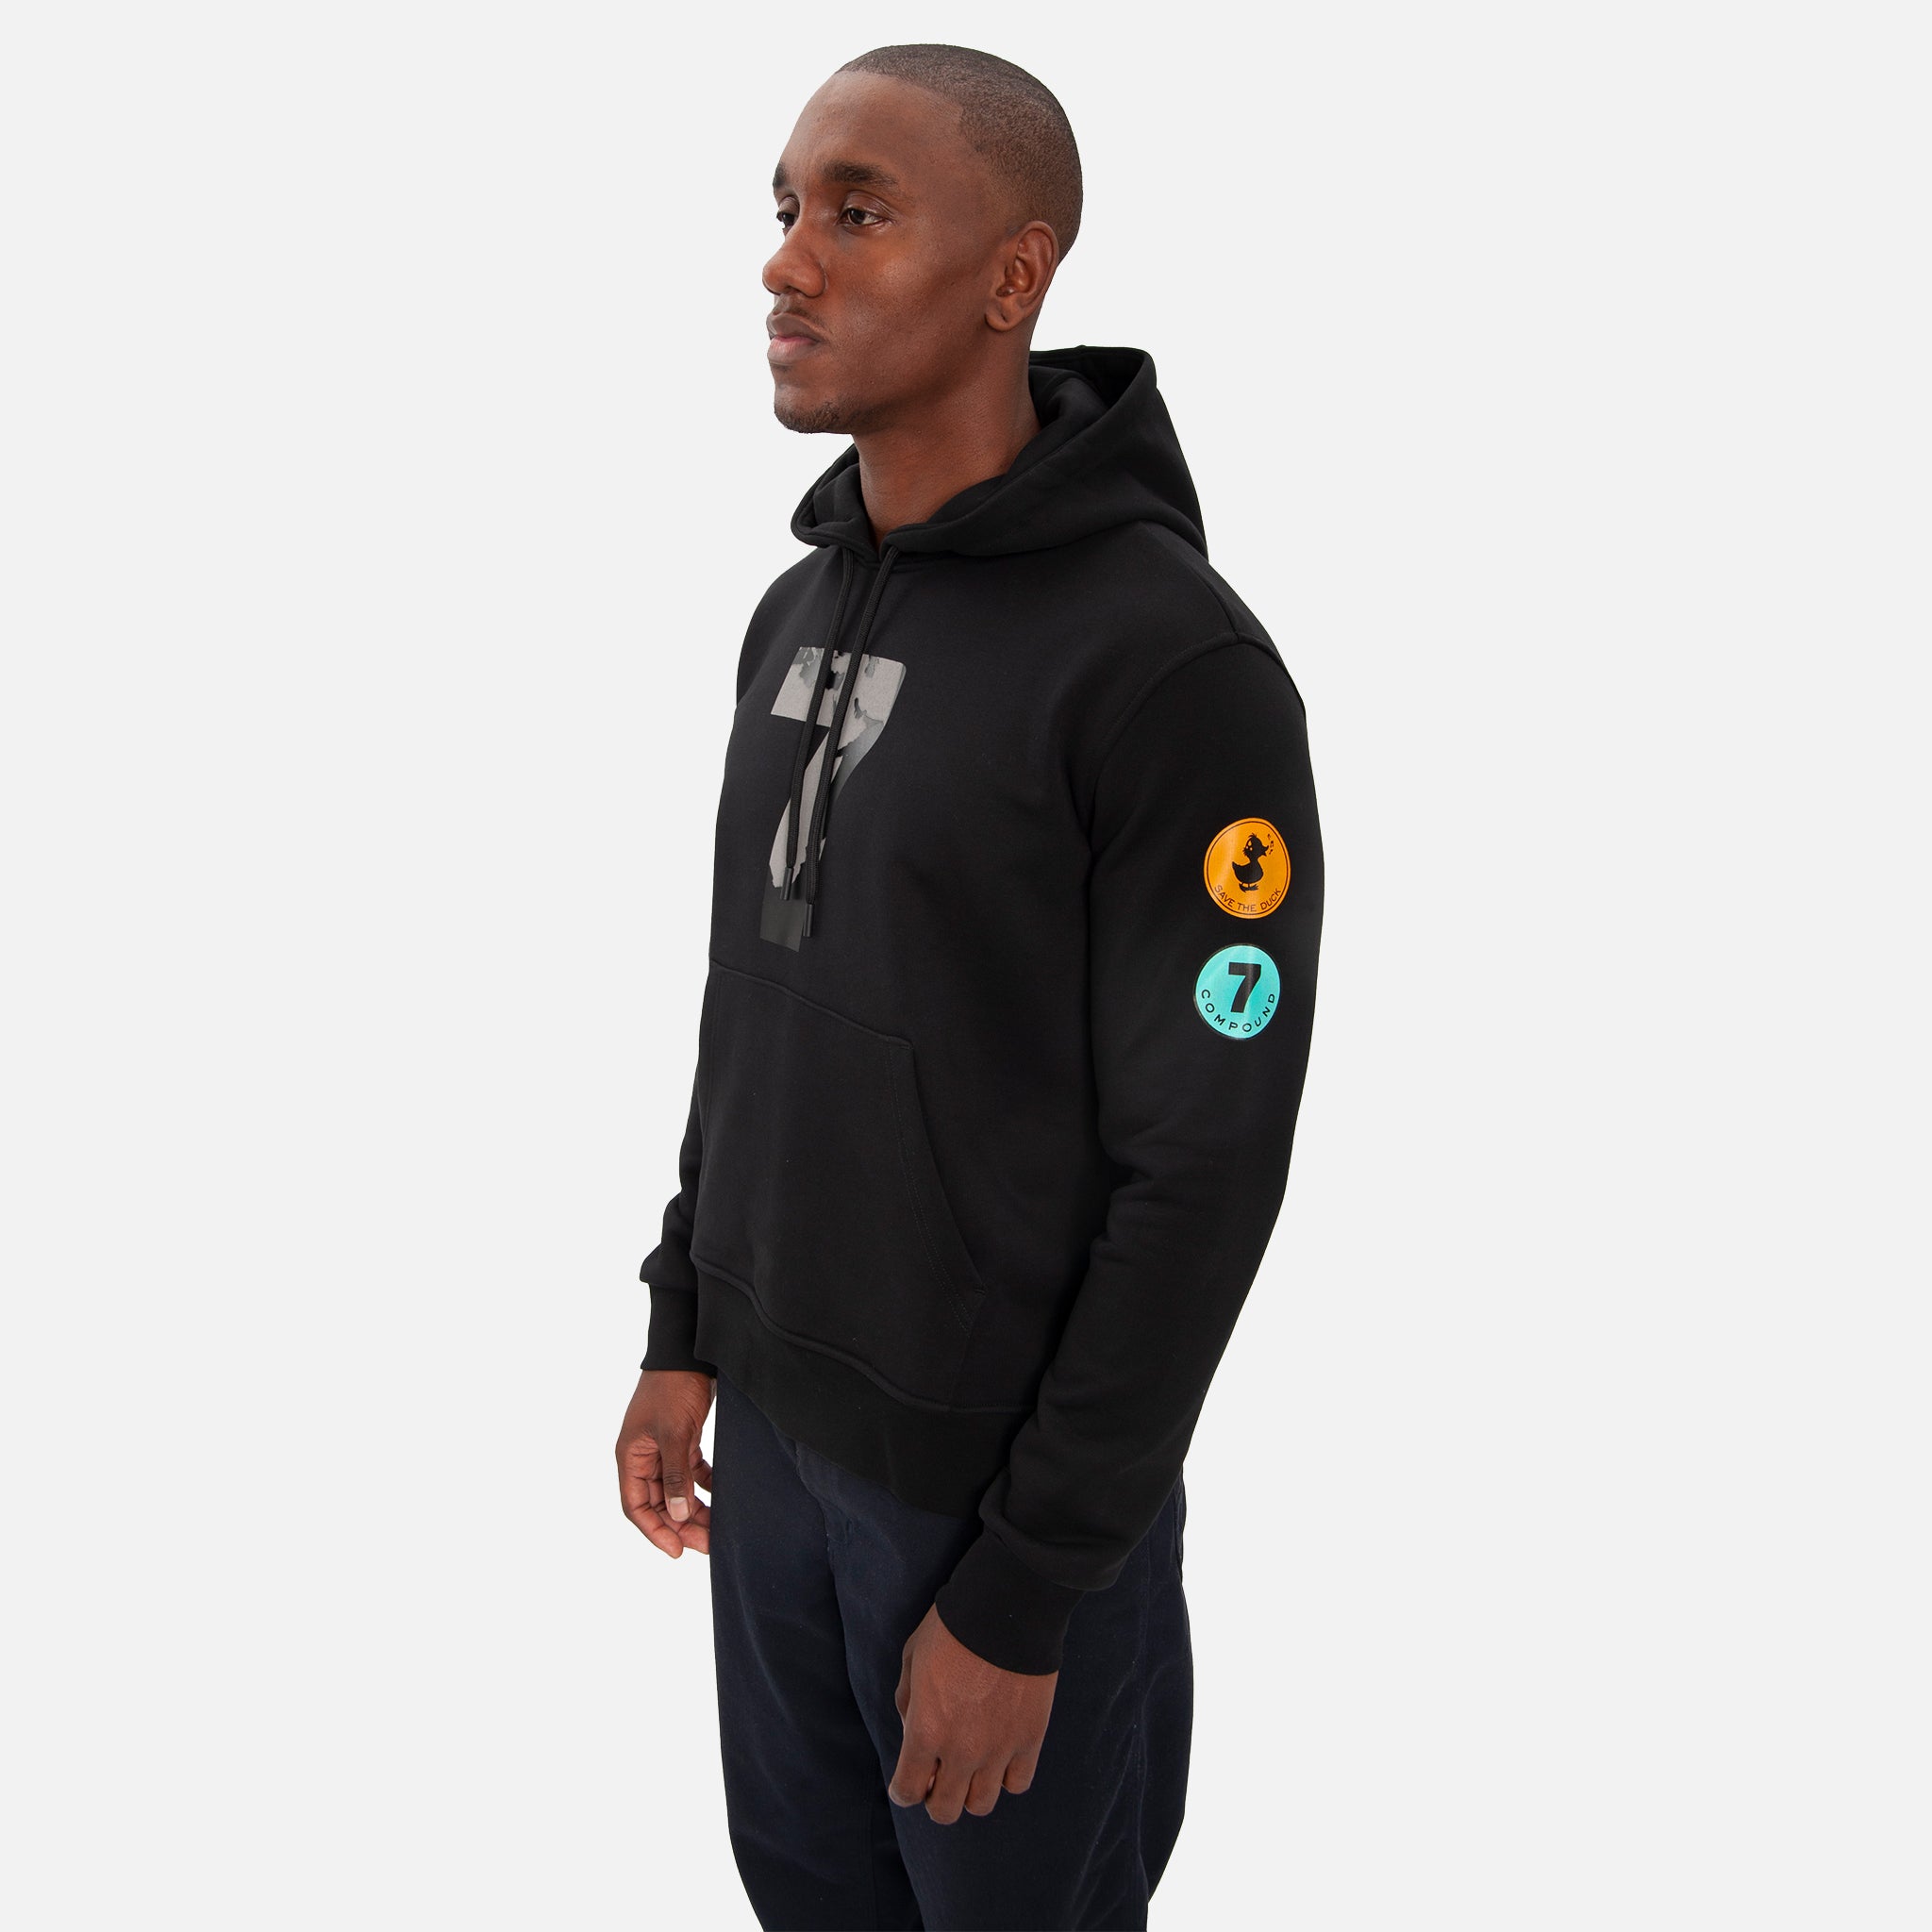 COMPOUND X SAVE THE DUCK "7" HOODIE - BLACK / GREY